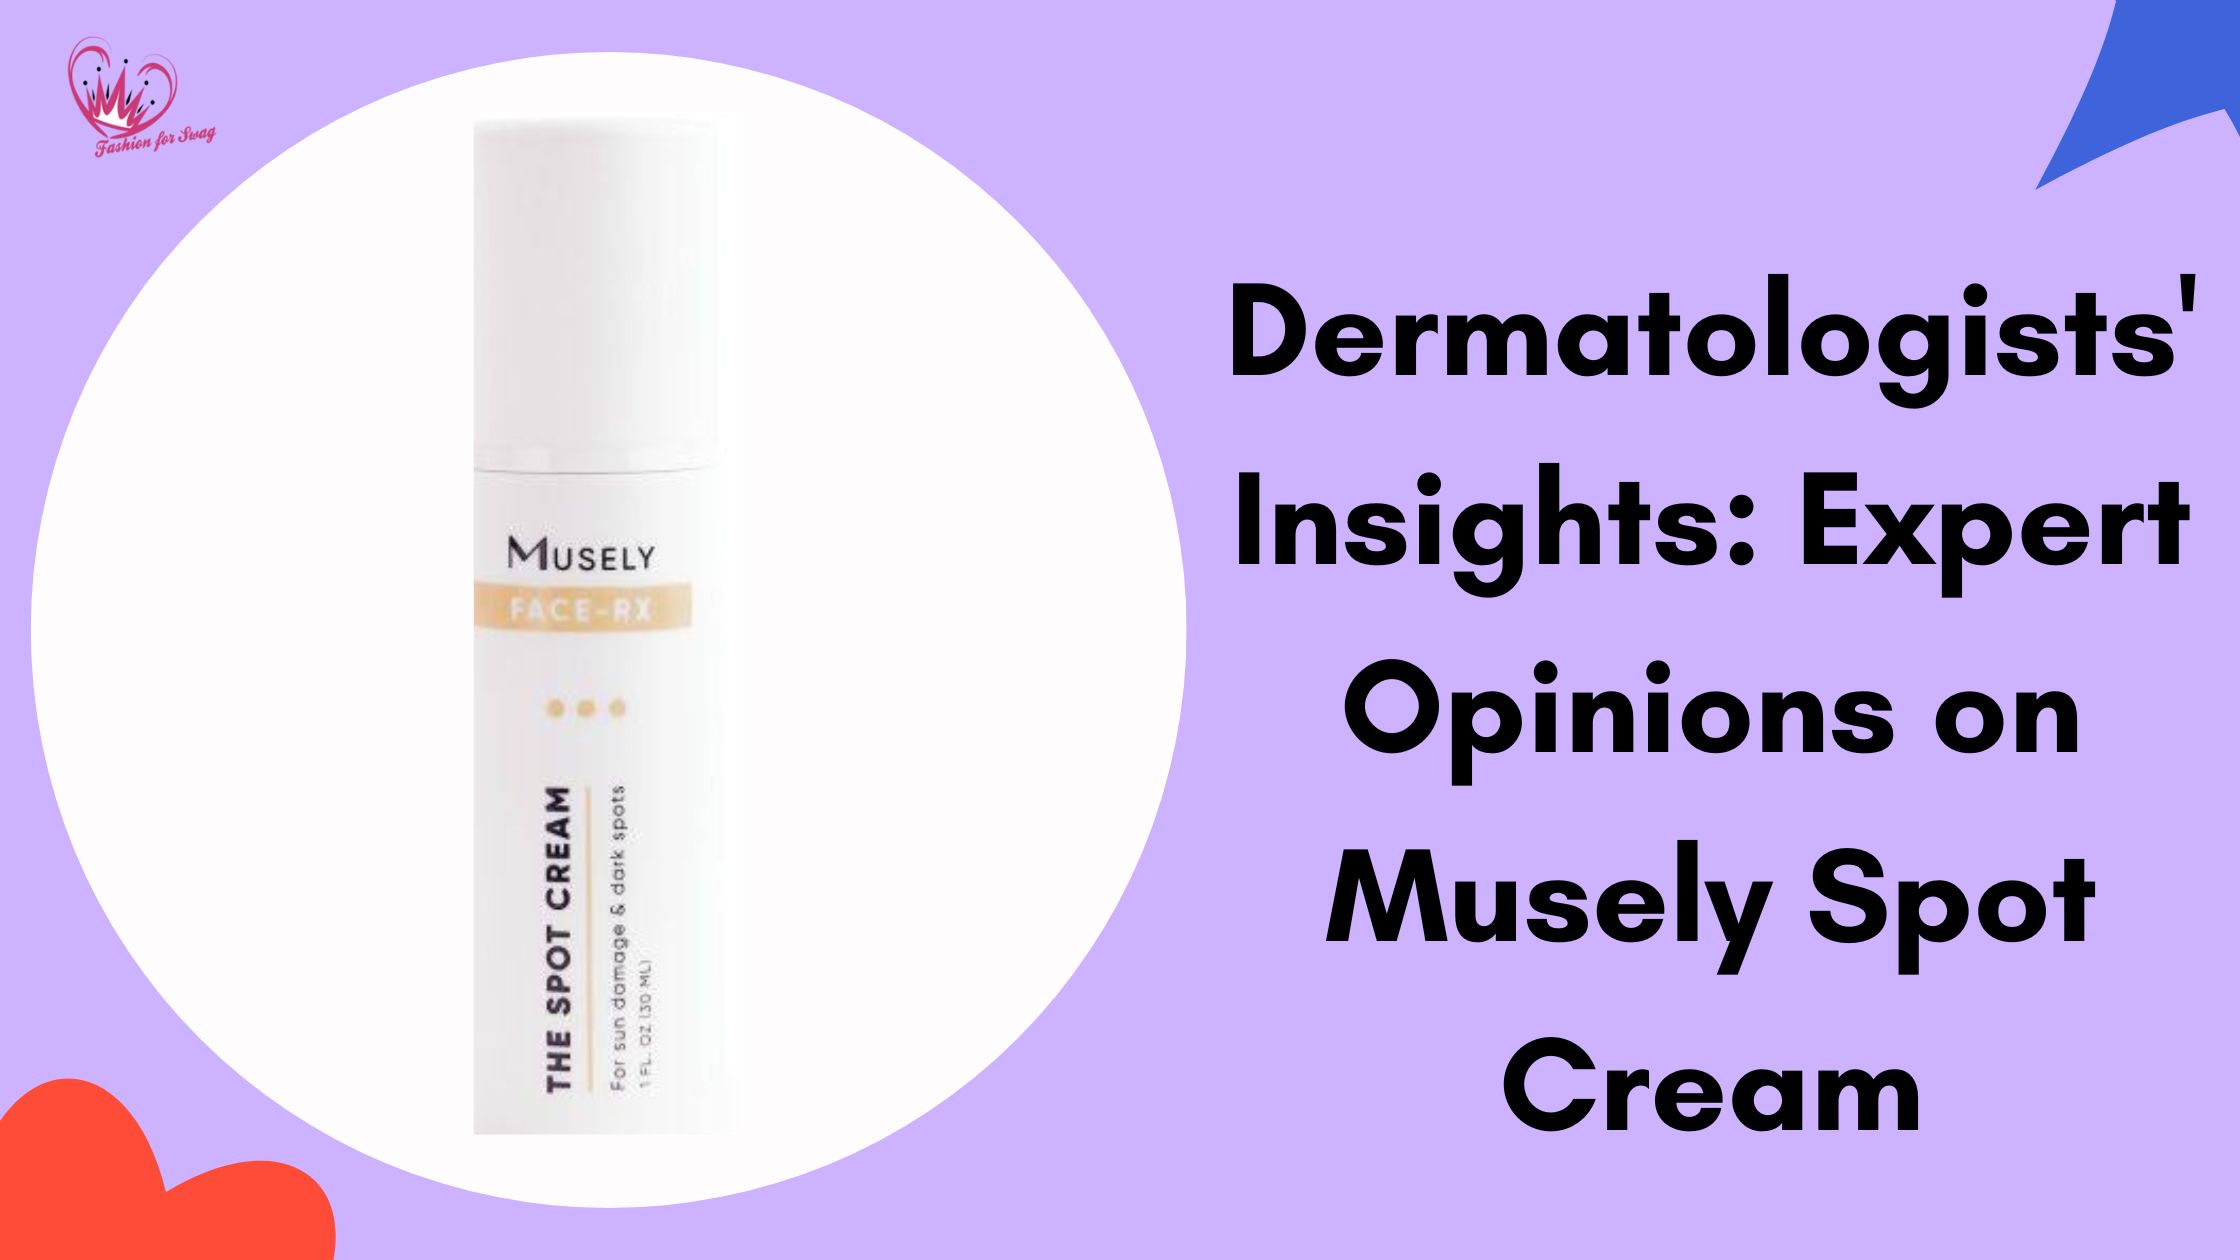 Dermatologists’ Insights: Expert Opinions on Musely Spot Cream